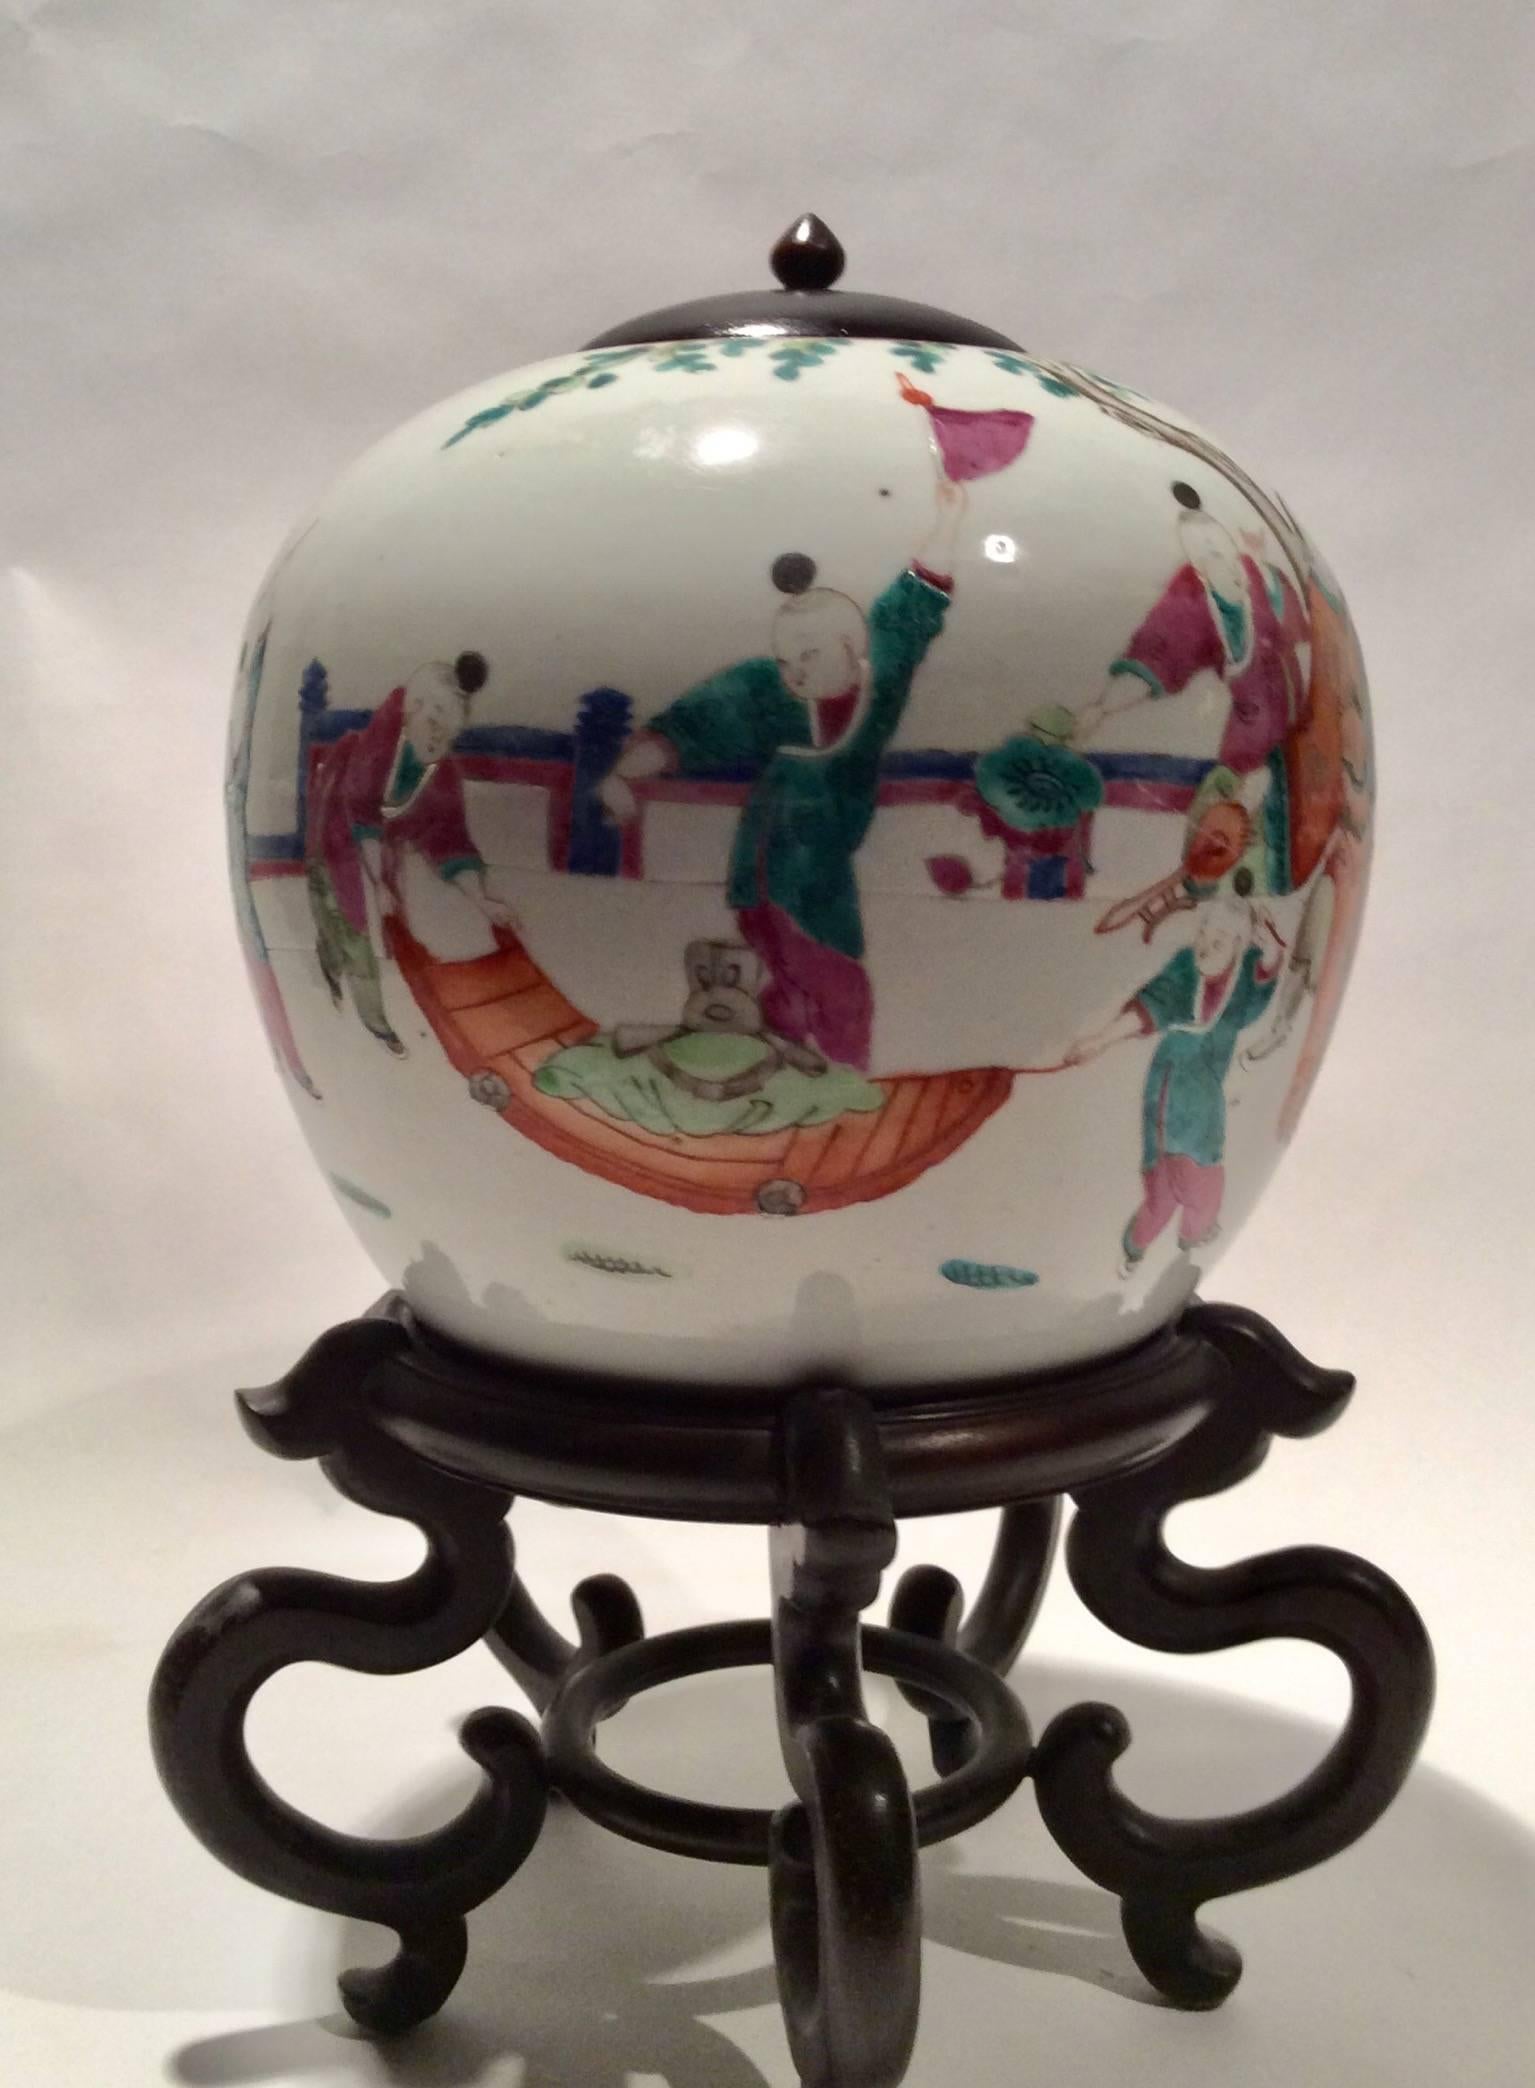 This porcelain jar is typical of pieces from the Tung Chih period of the late Ching dynasty (1862-1875) hand-painted in Famille Rose palette depicting a playful scene with children.